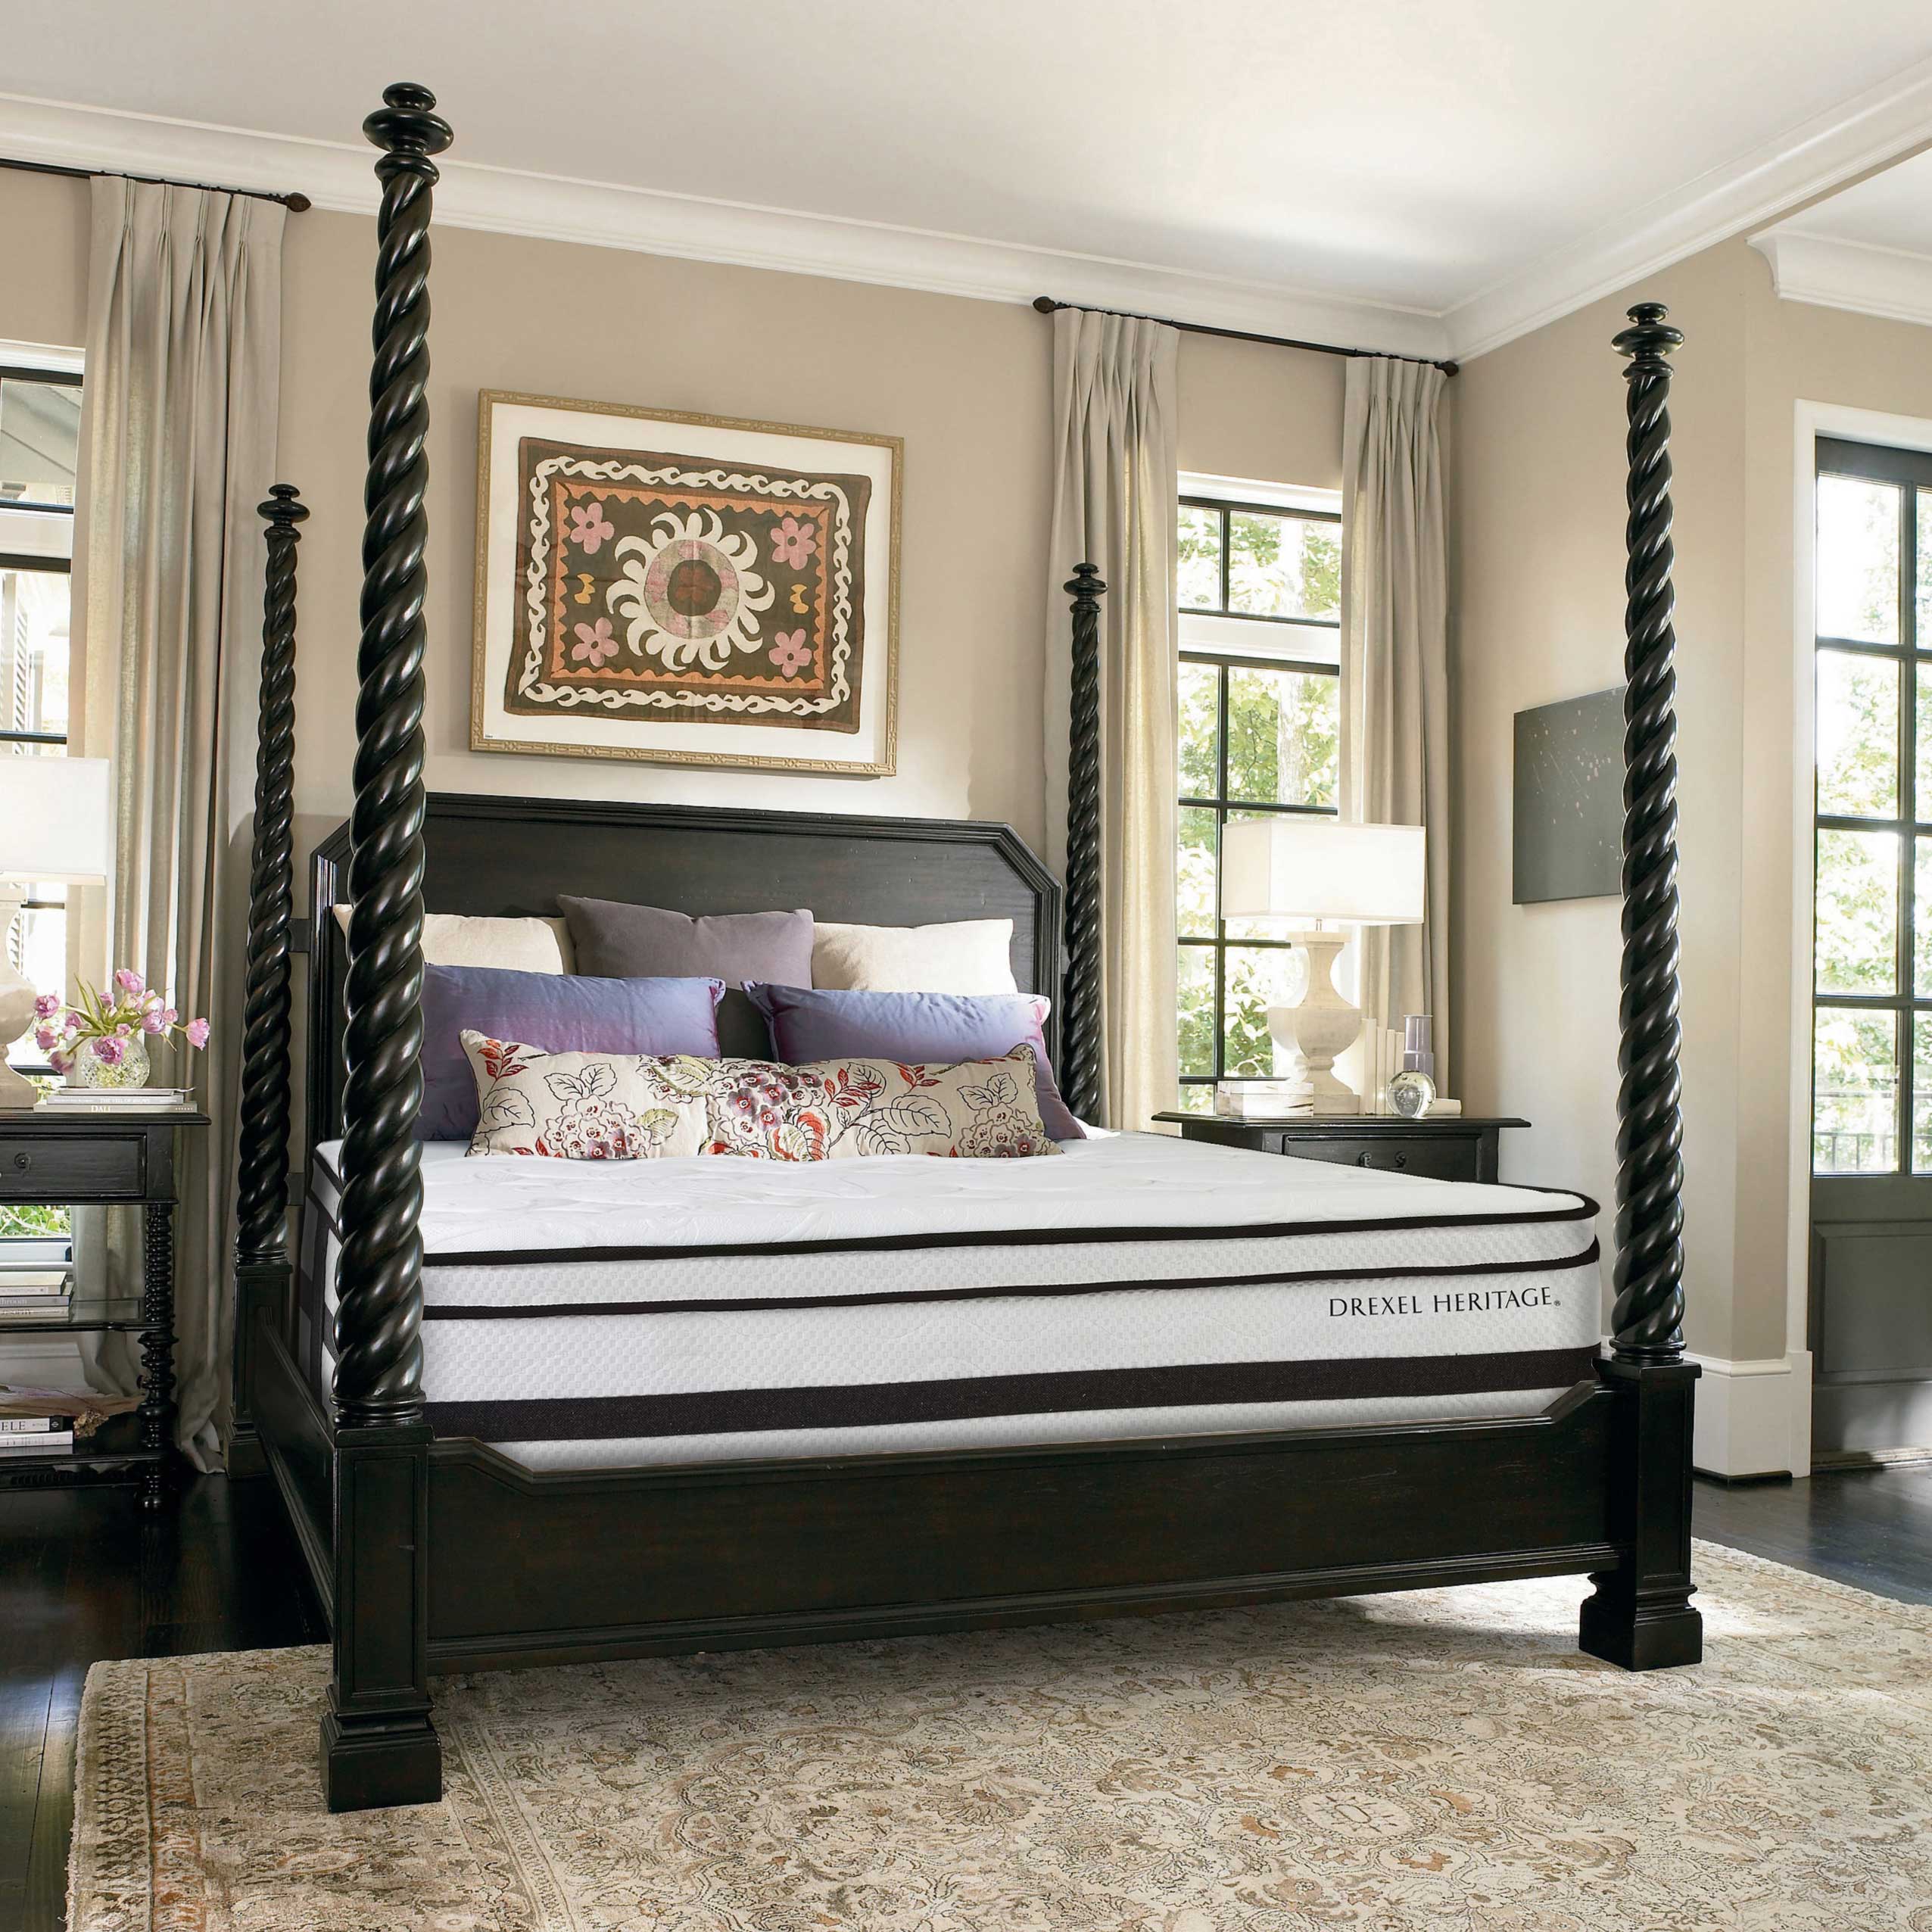 Heritage King Bed Frame and Headboard